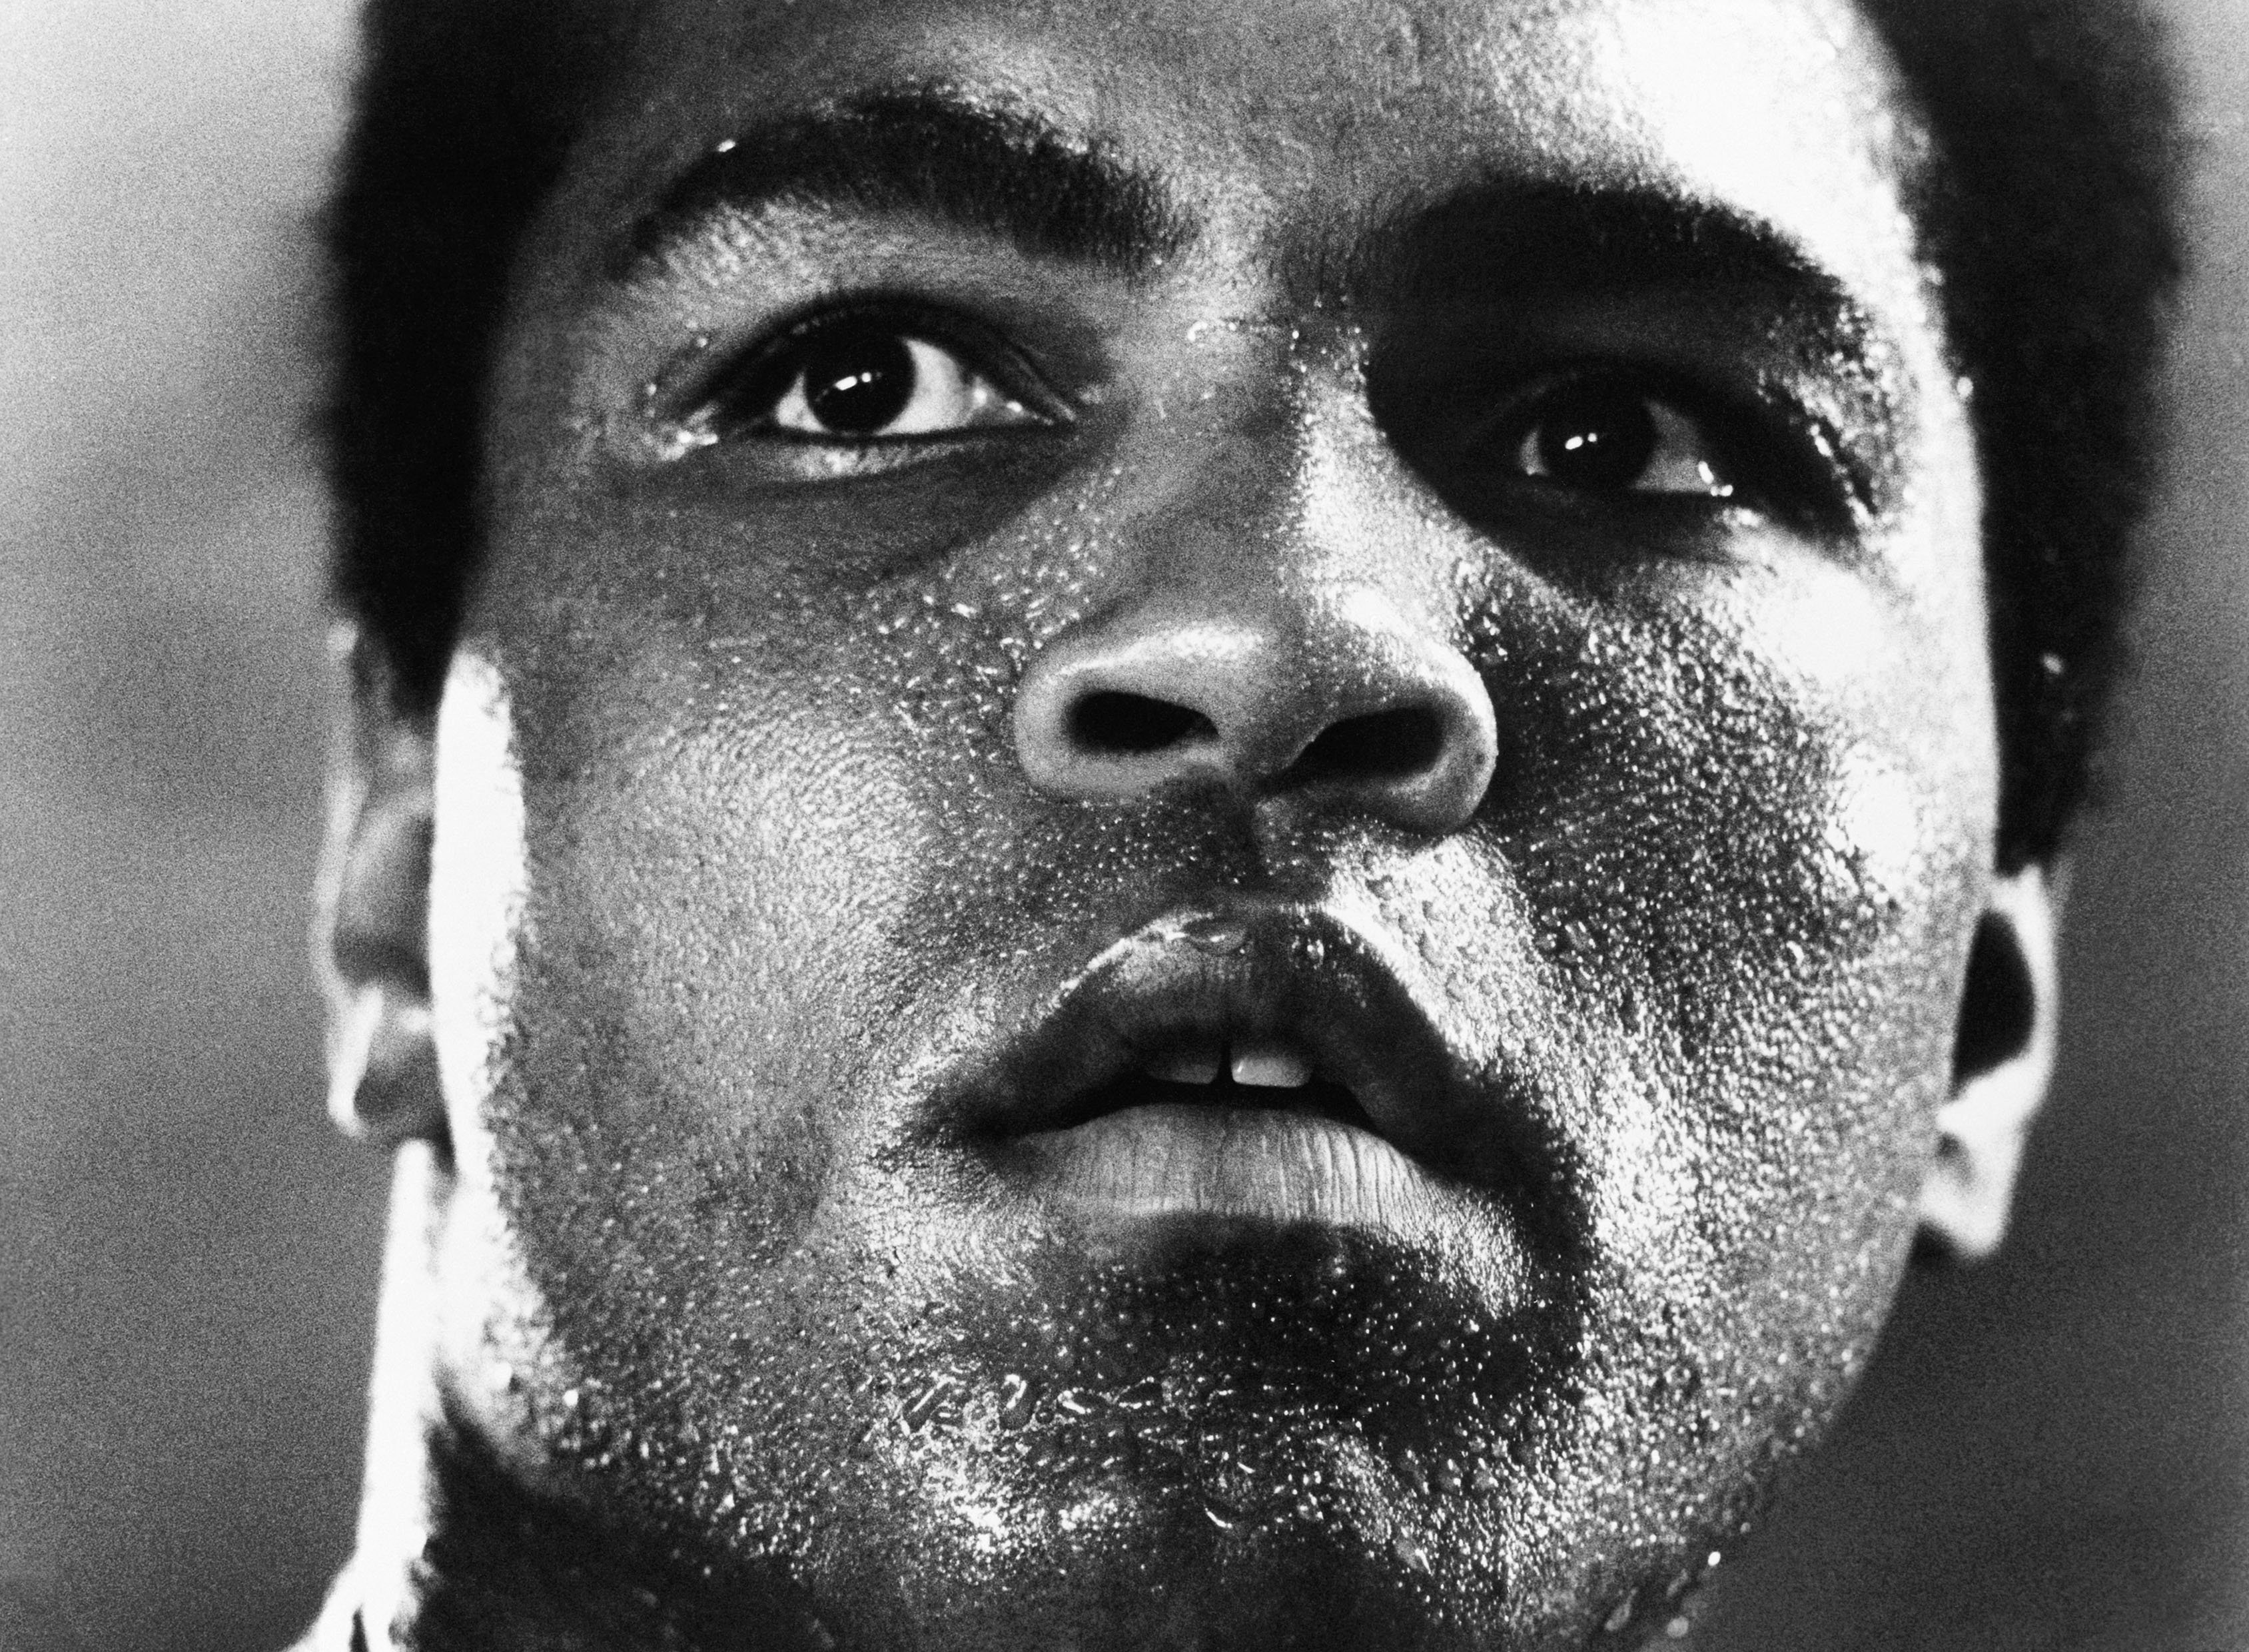  A portrait of heavyweight boxer Muhammad Ali as he trains for an upcoming fight against Earnie Shavers, 1979